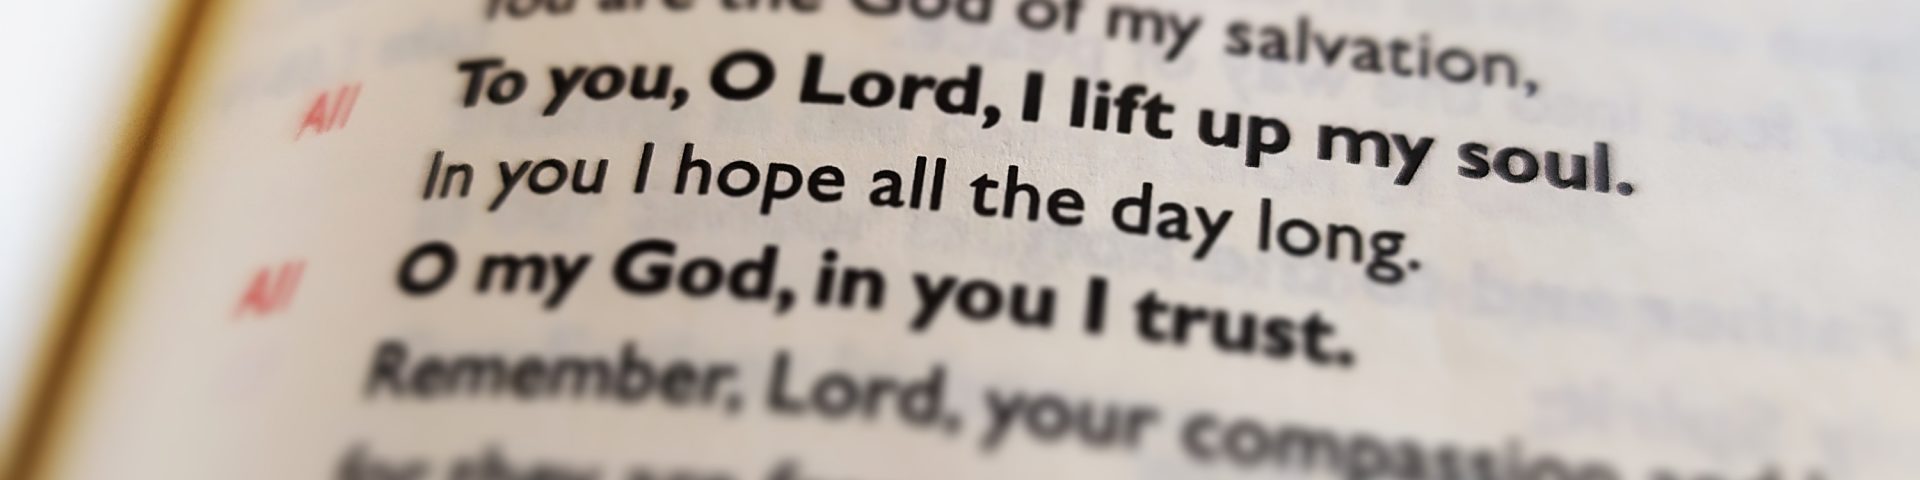 Image of book with words, "To you O Lord I lift up my soul"